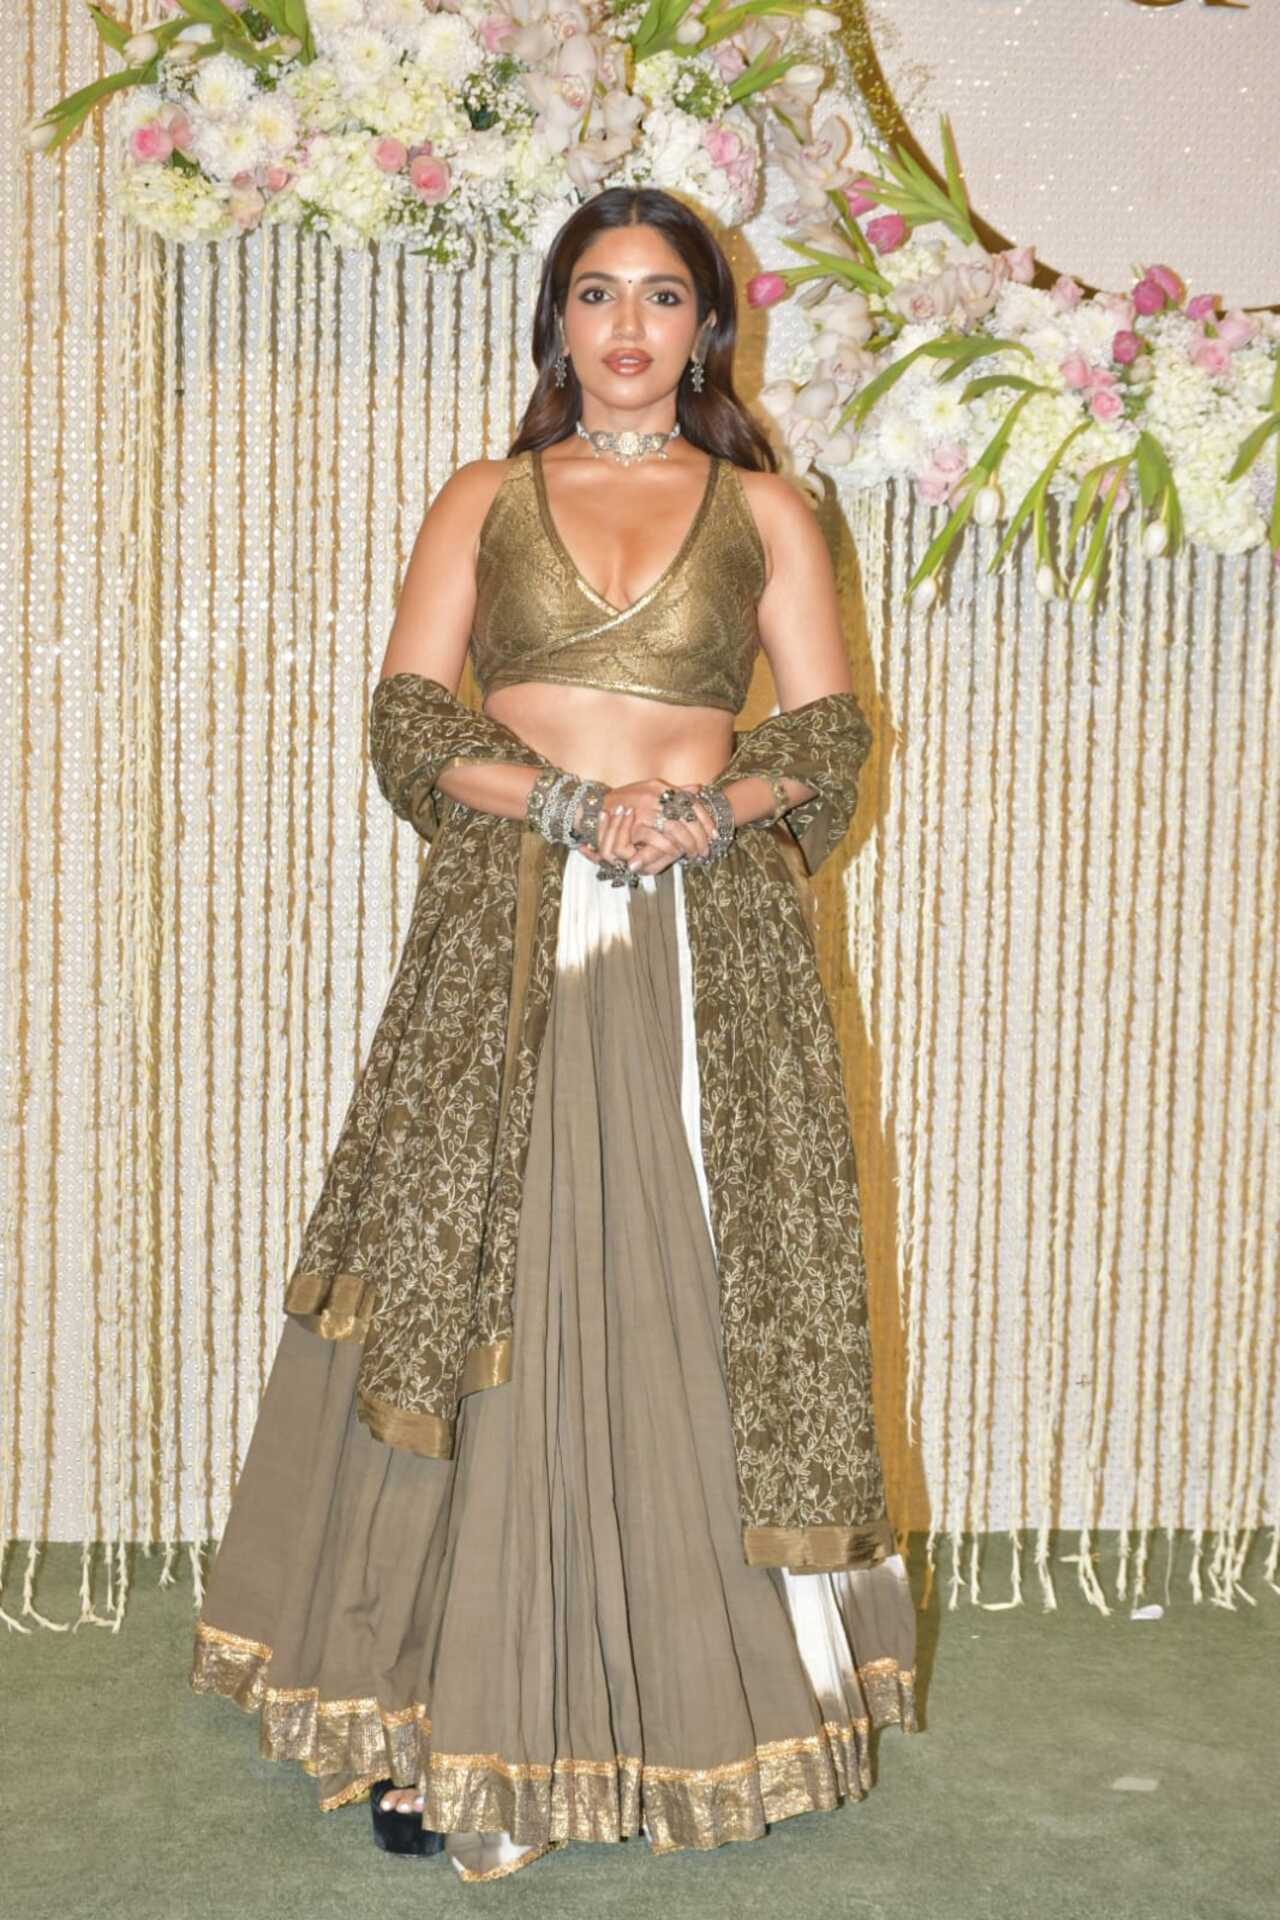 Bhumi Pednekar showed how to ace the mud brown lehenga look for a wedding night